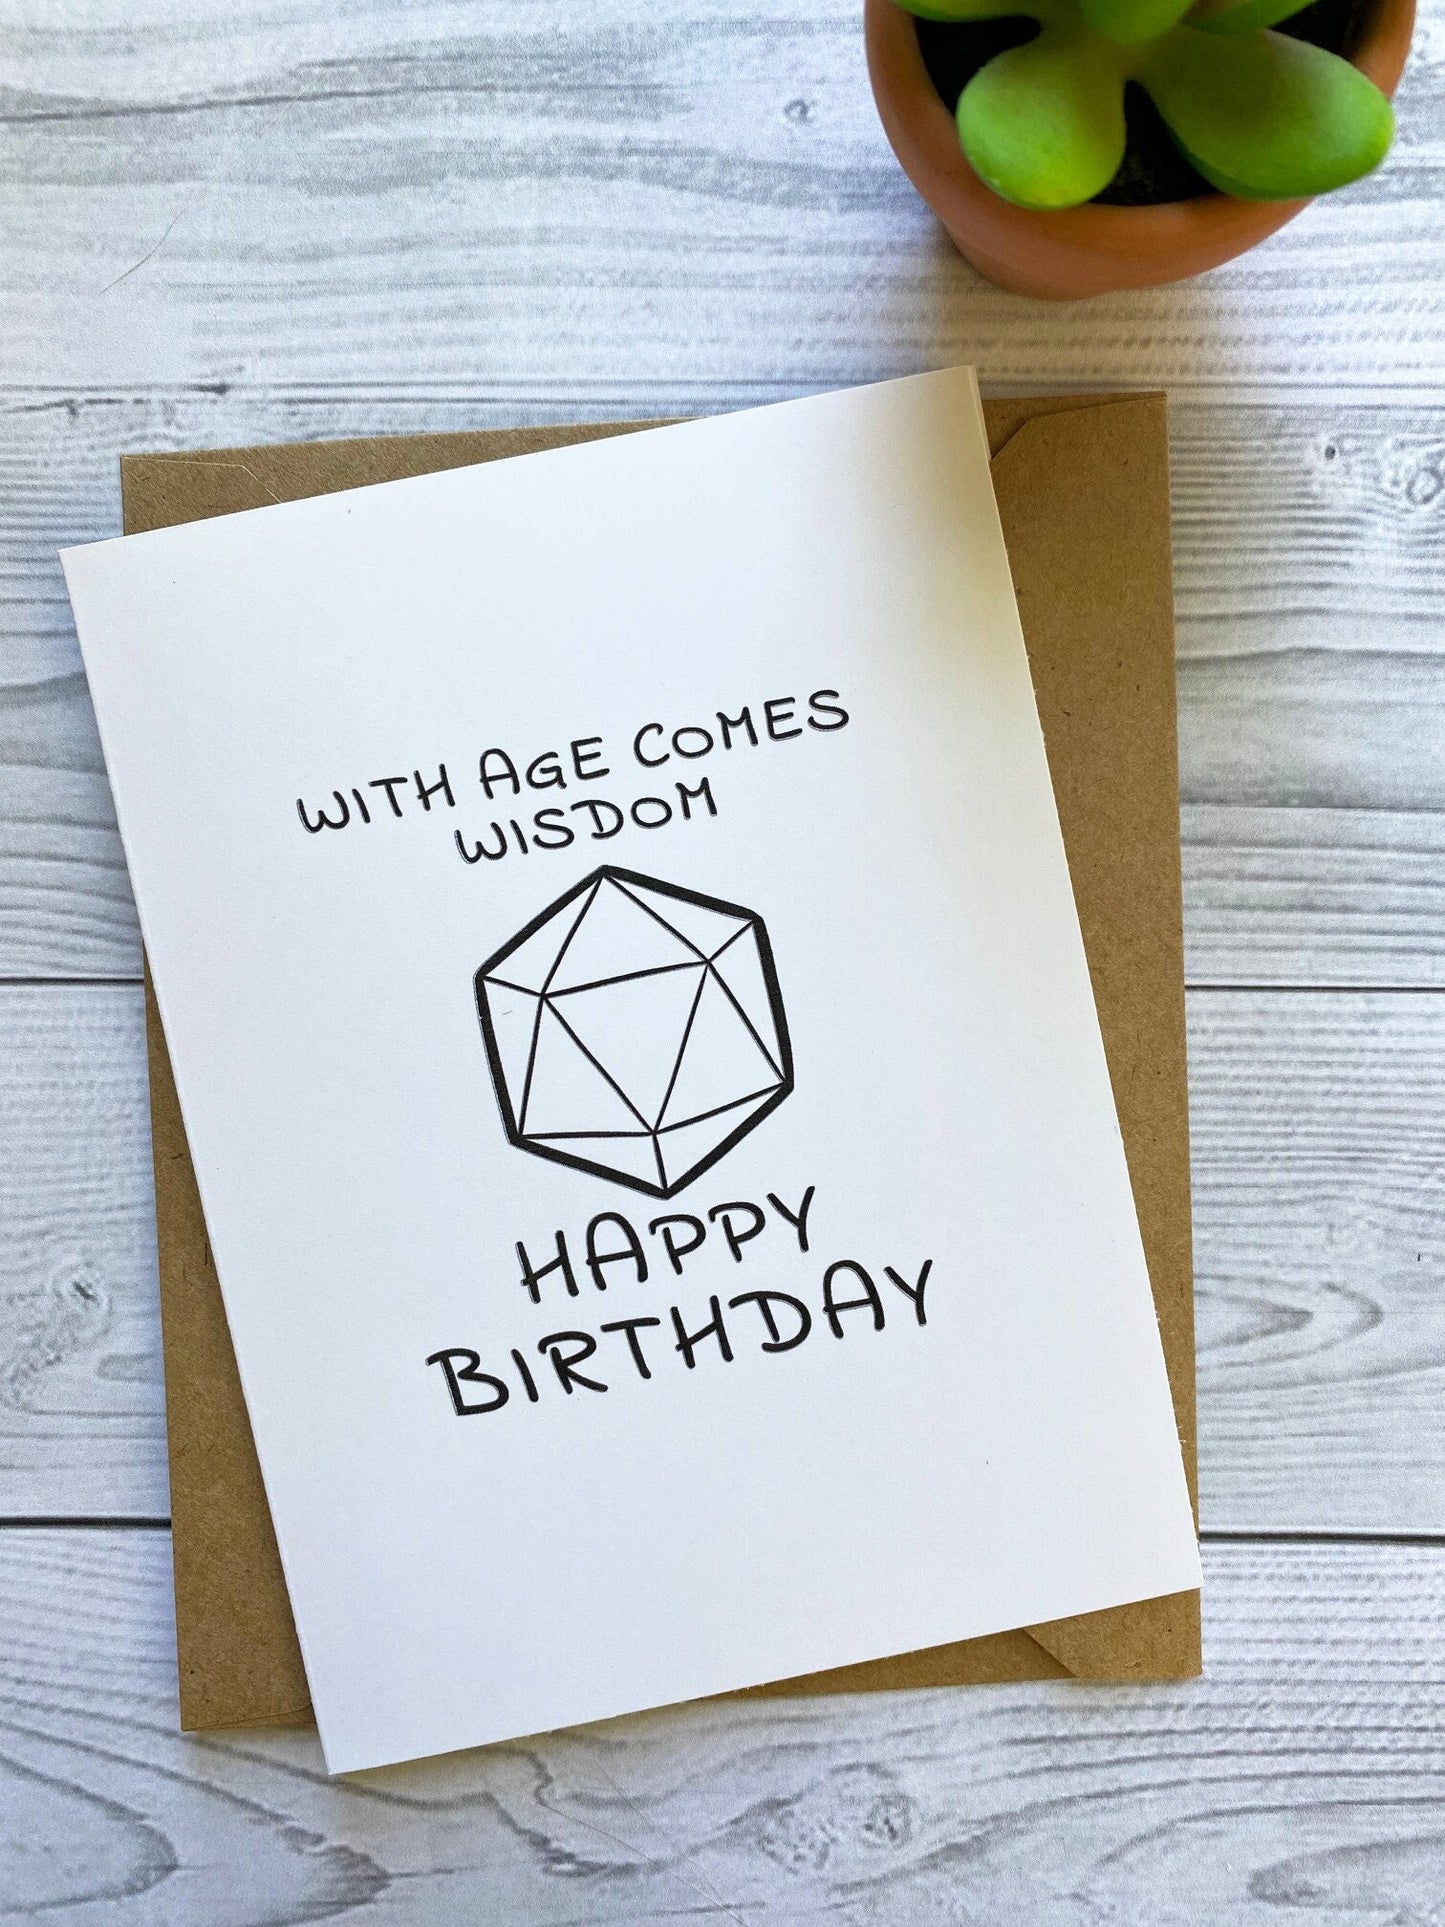 DnD Greeting Card 3 Set "With Age Comes Wisdom Happy Birthday" Blank Inside